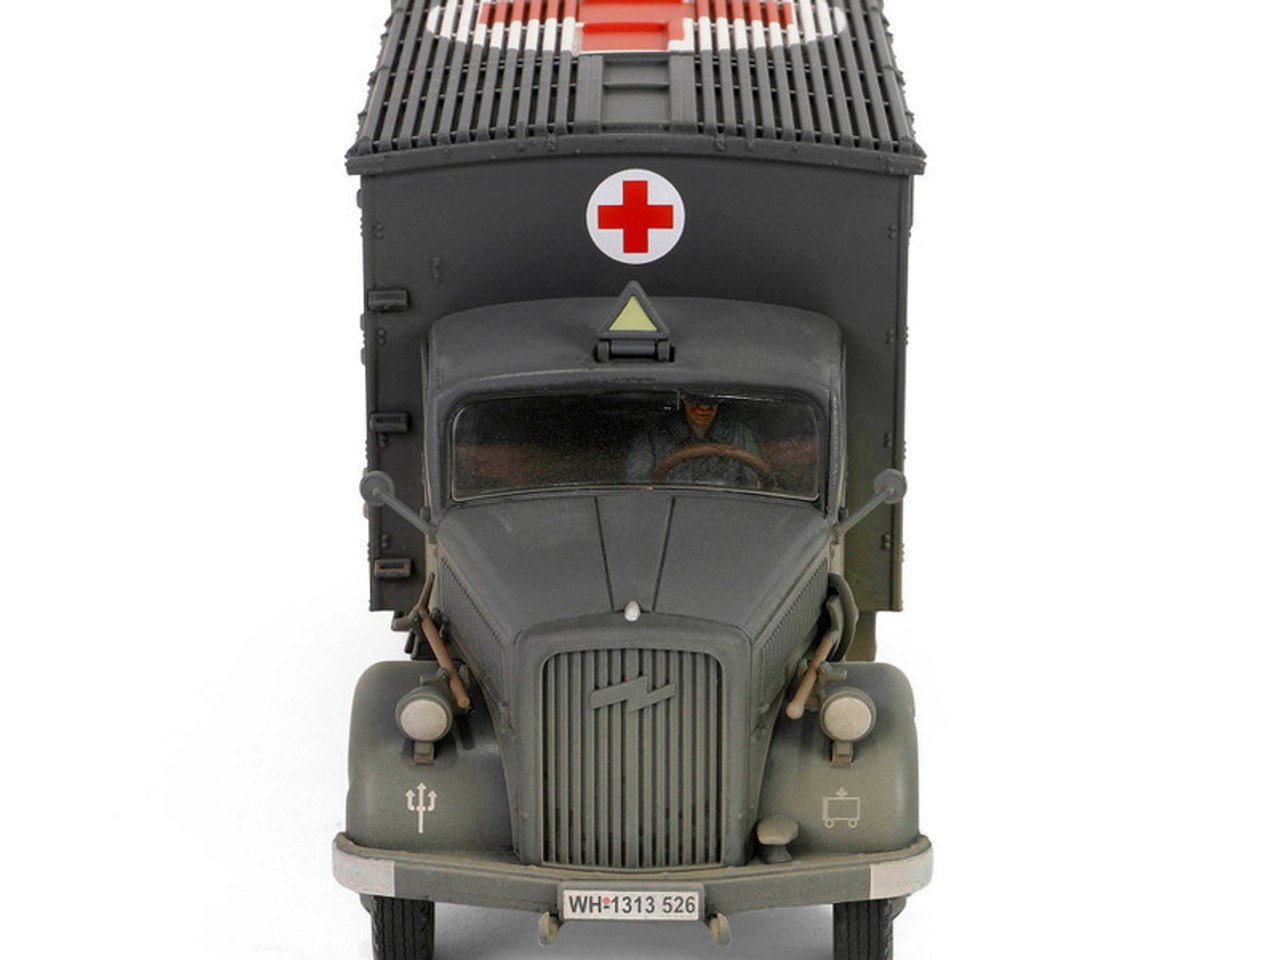 Opel-Blitz Kfz.305 Ambulance Gray (Weathered) "German Army" "Armoured Fighting Vehicle" Series 1/32 Diecast Model by Forces of Valor